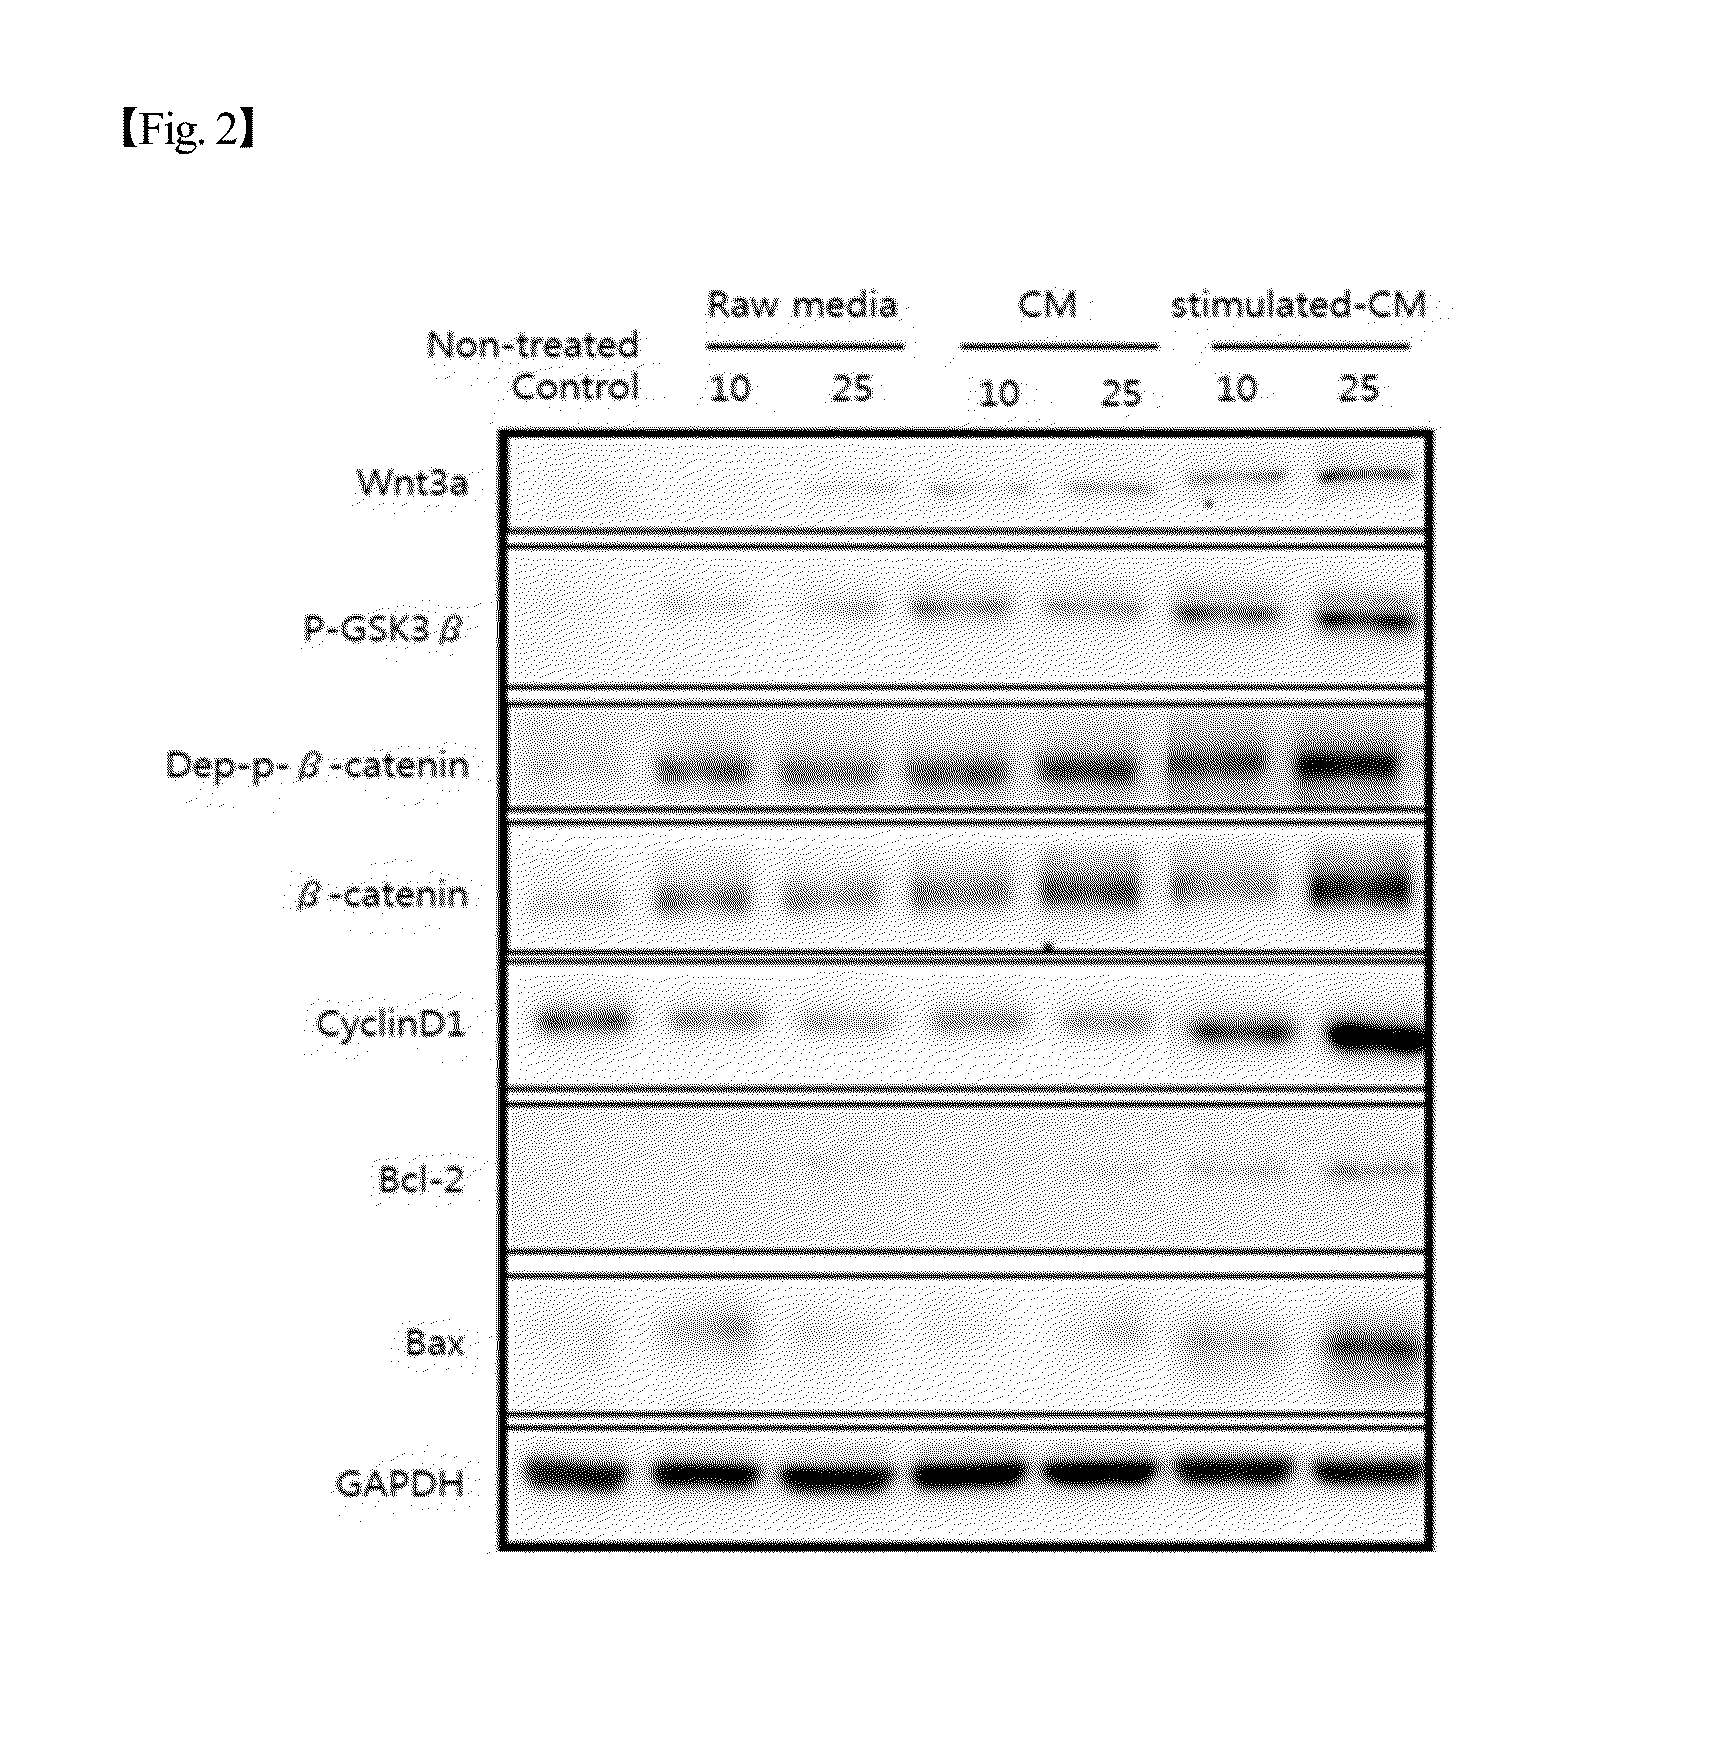 Hair growth promoting capacity of conditioned media of stimulated stem cells and use thereof